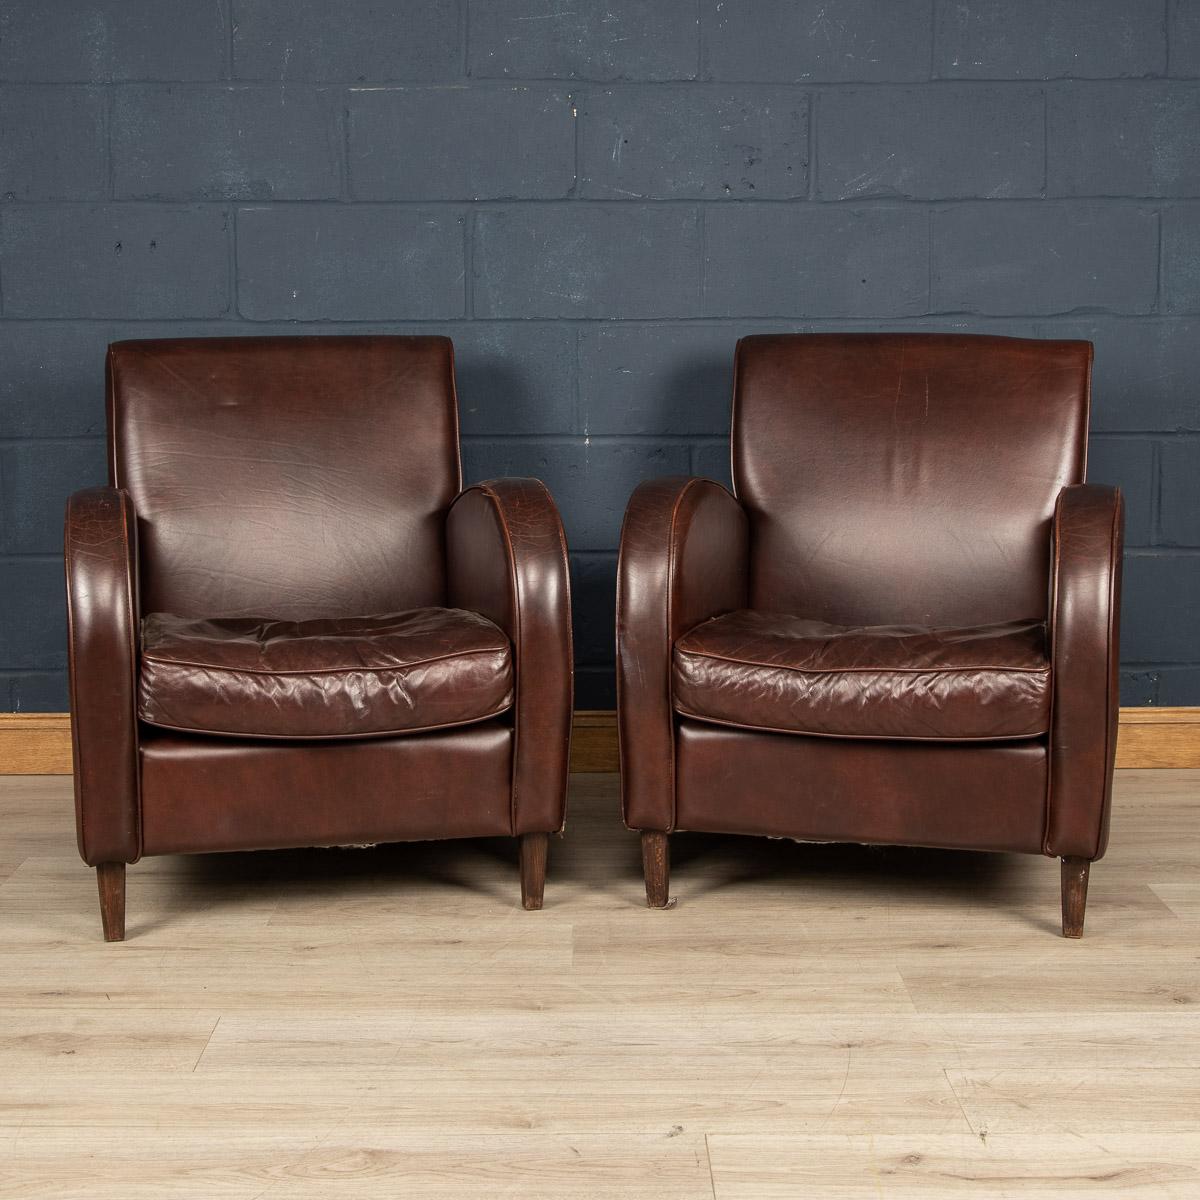 A wonderful pair of leather wing back armchairs. Dating to the latter part of the 20th century these chairs have been realised by the finest Dutch craftsmen, the solid wood frame upholstered in superb quality honey coloured sheepskin leather which